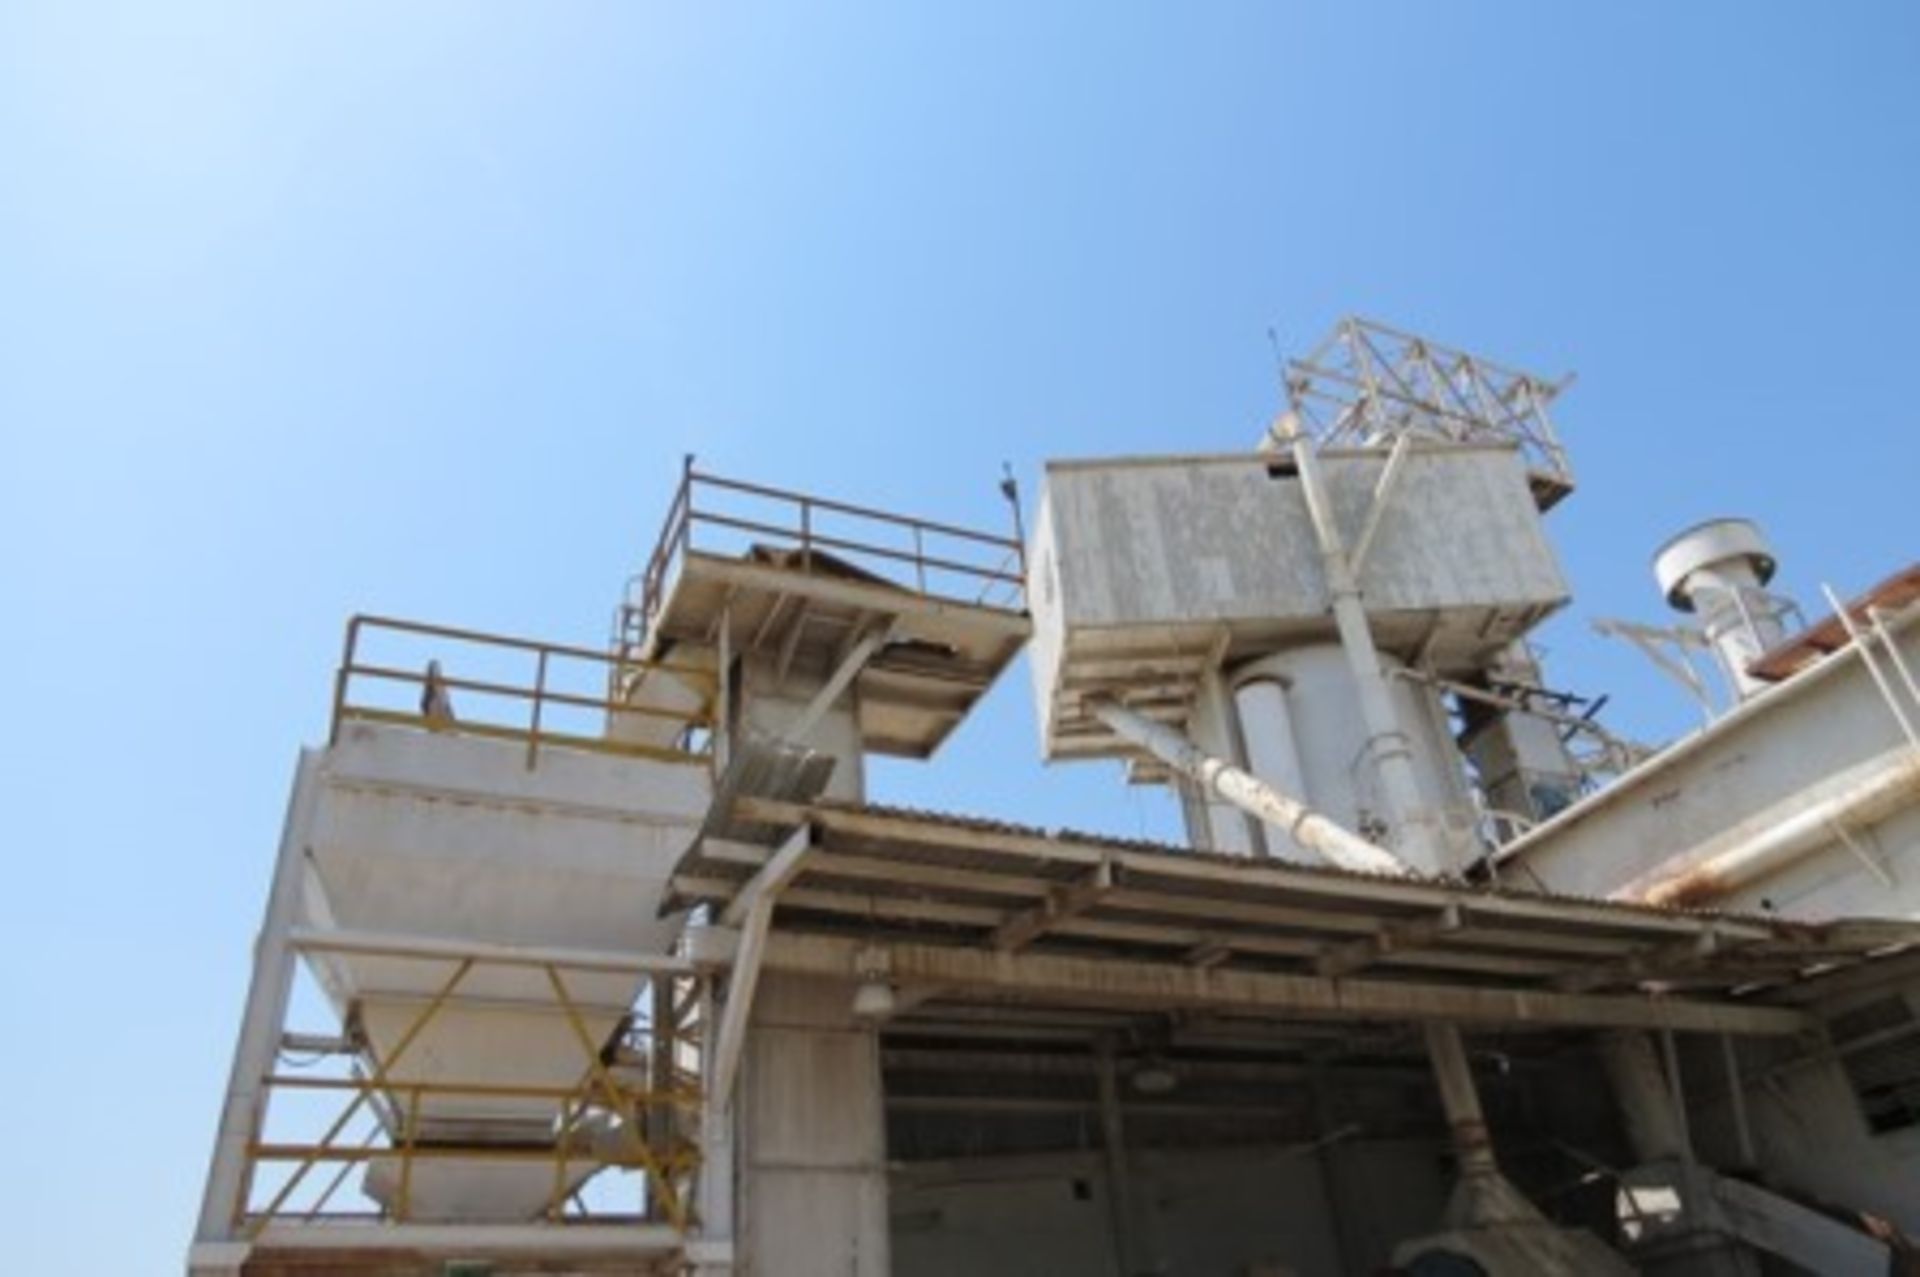 Dust collector, with 2 150 hp centrifugal blowers, filters, ducts, cooling tower - Image 40 of 46